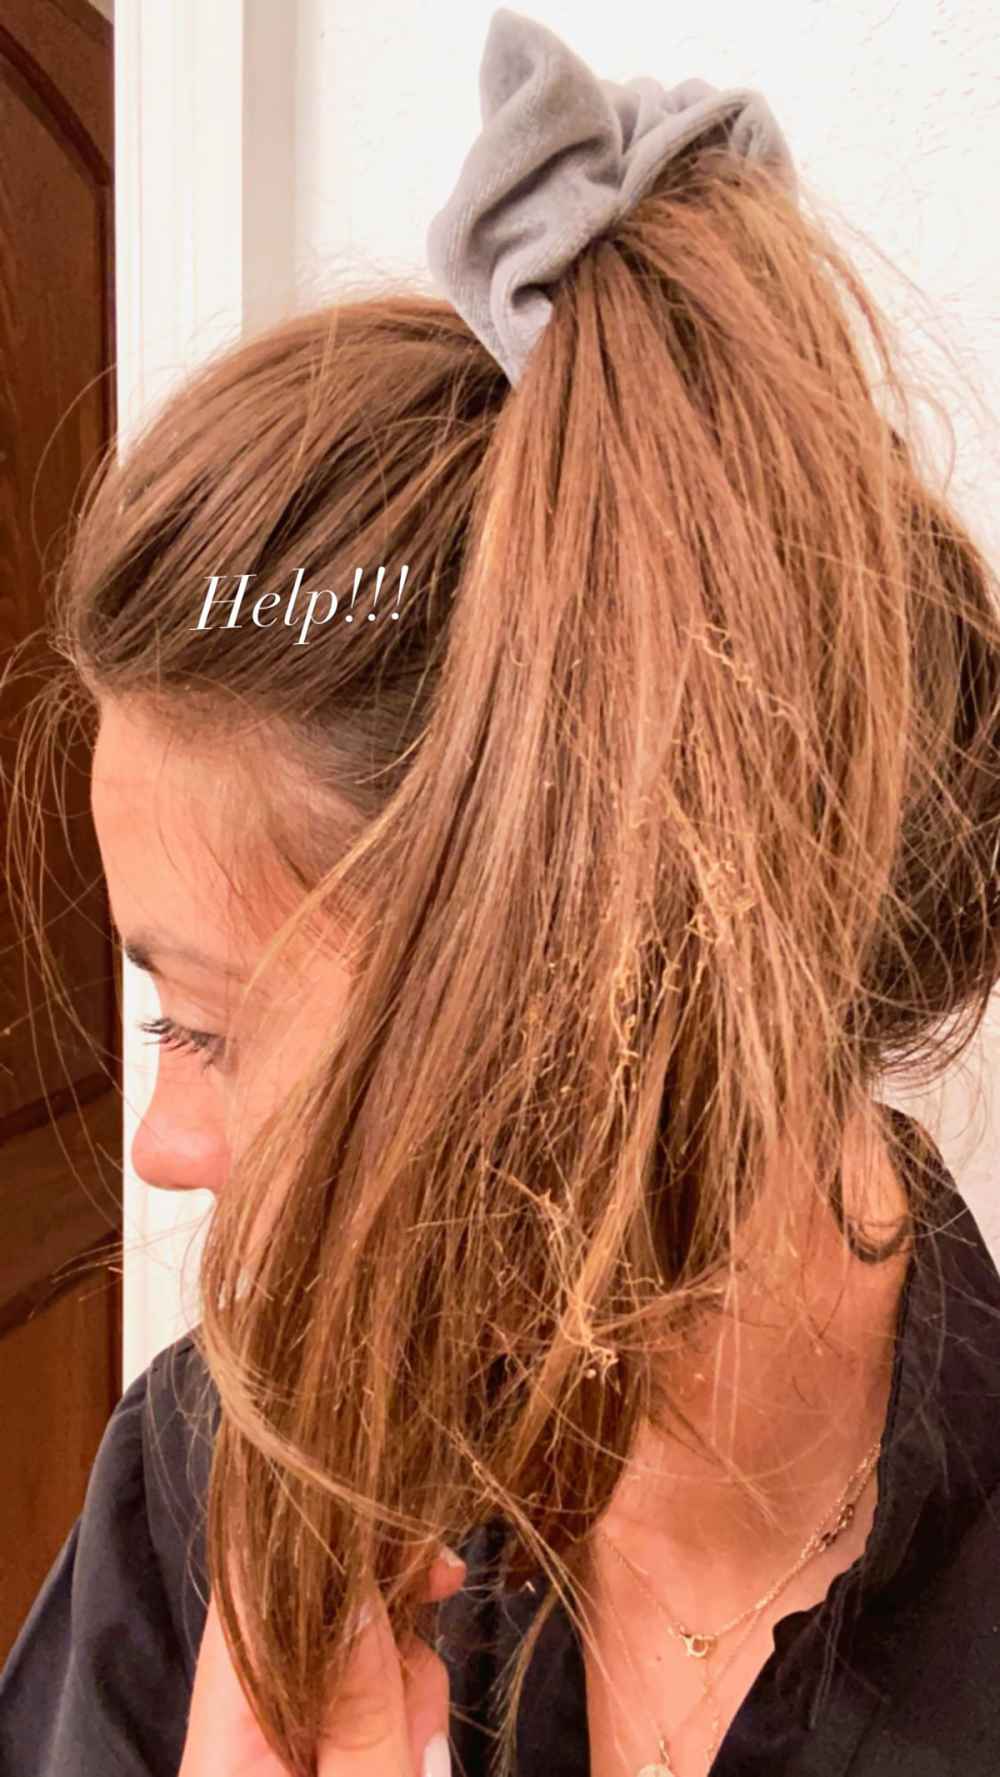 The Bachelor’s Kelley Flanagan Accidentally Sets Her Hair on Fire: Pics